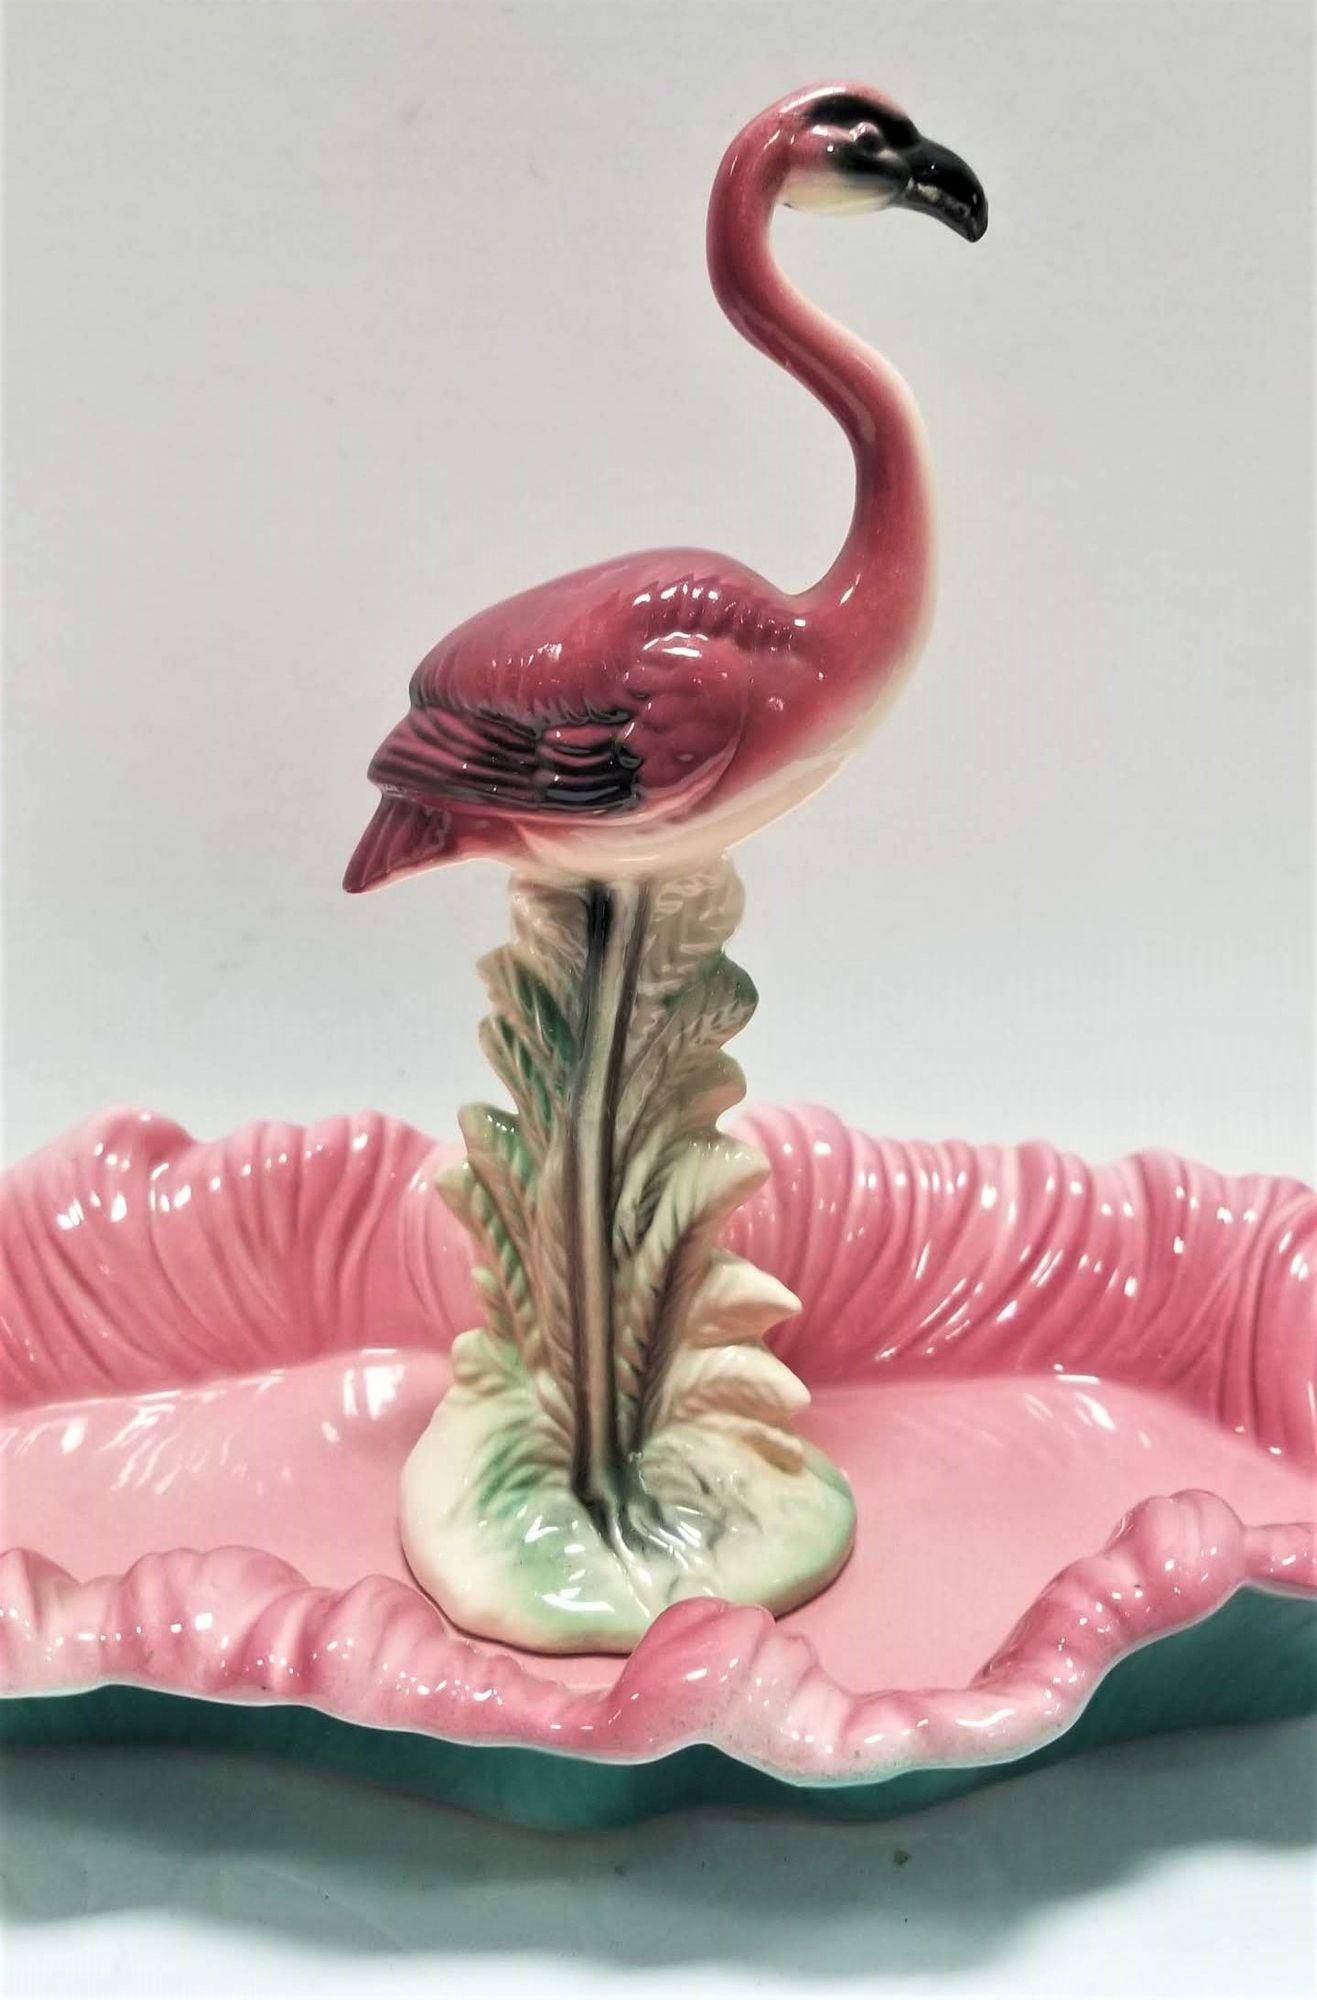 Midcentury pink and green flamingo ceramic figurine in flamingo POOL tray.
Maddux of California was a ceramics company that operated in California from the 1930s to the 1970s. They produced a wide range of ceramic items, including decorative